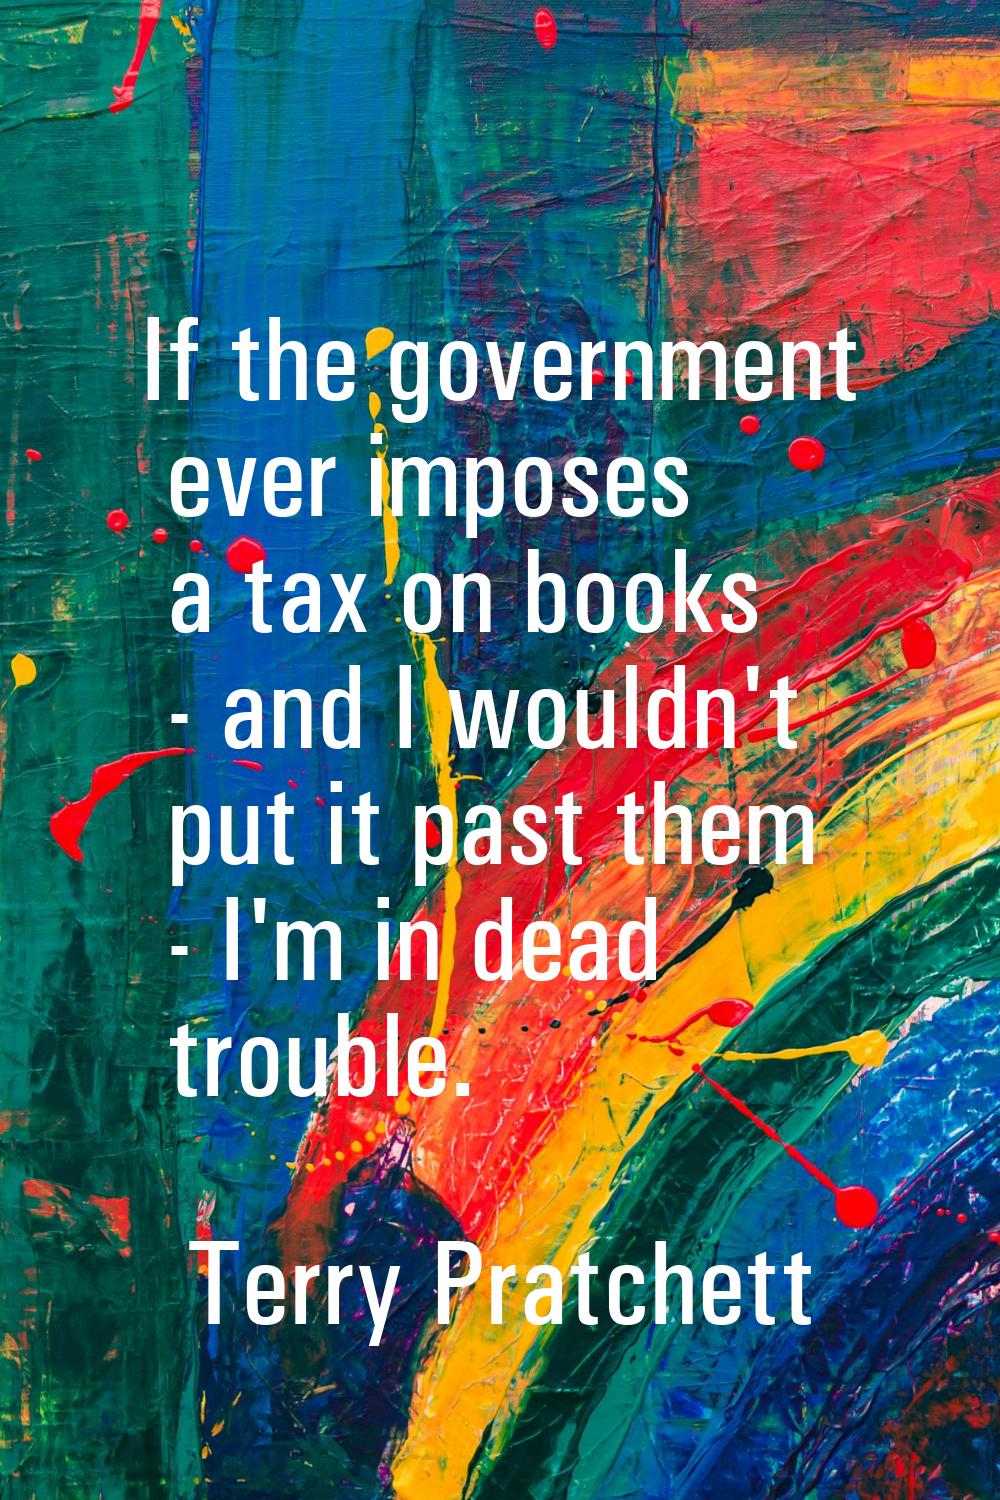 If the government ever imposes a tax on books - and I wouldn't put it past them - I'm in dead troub